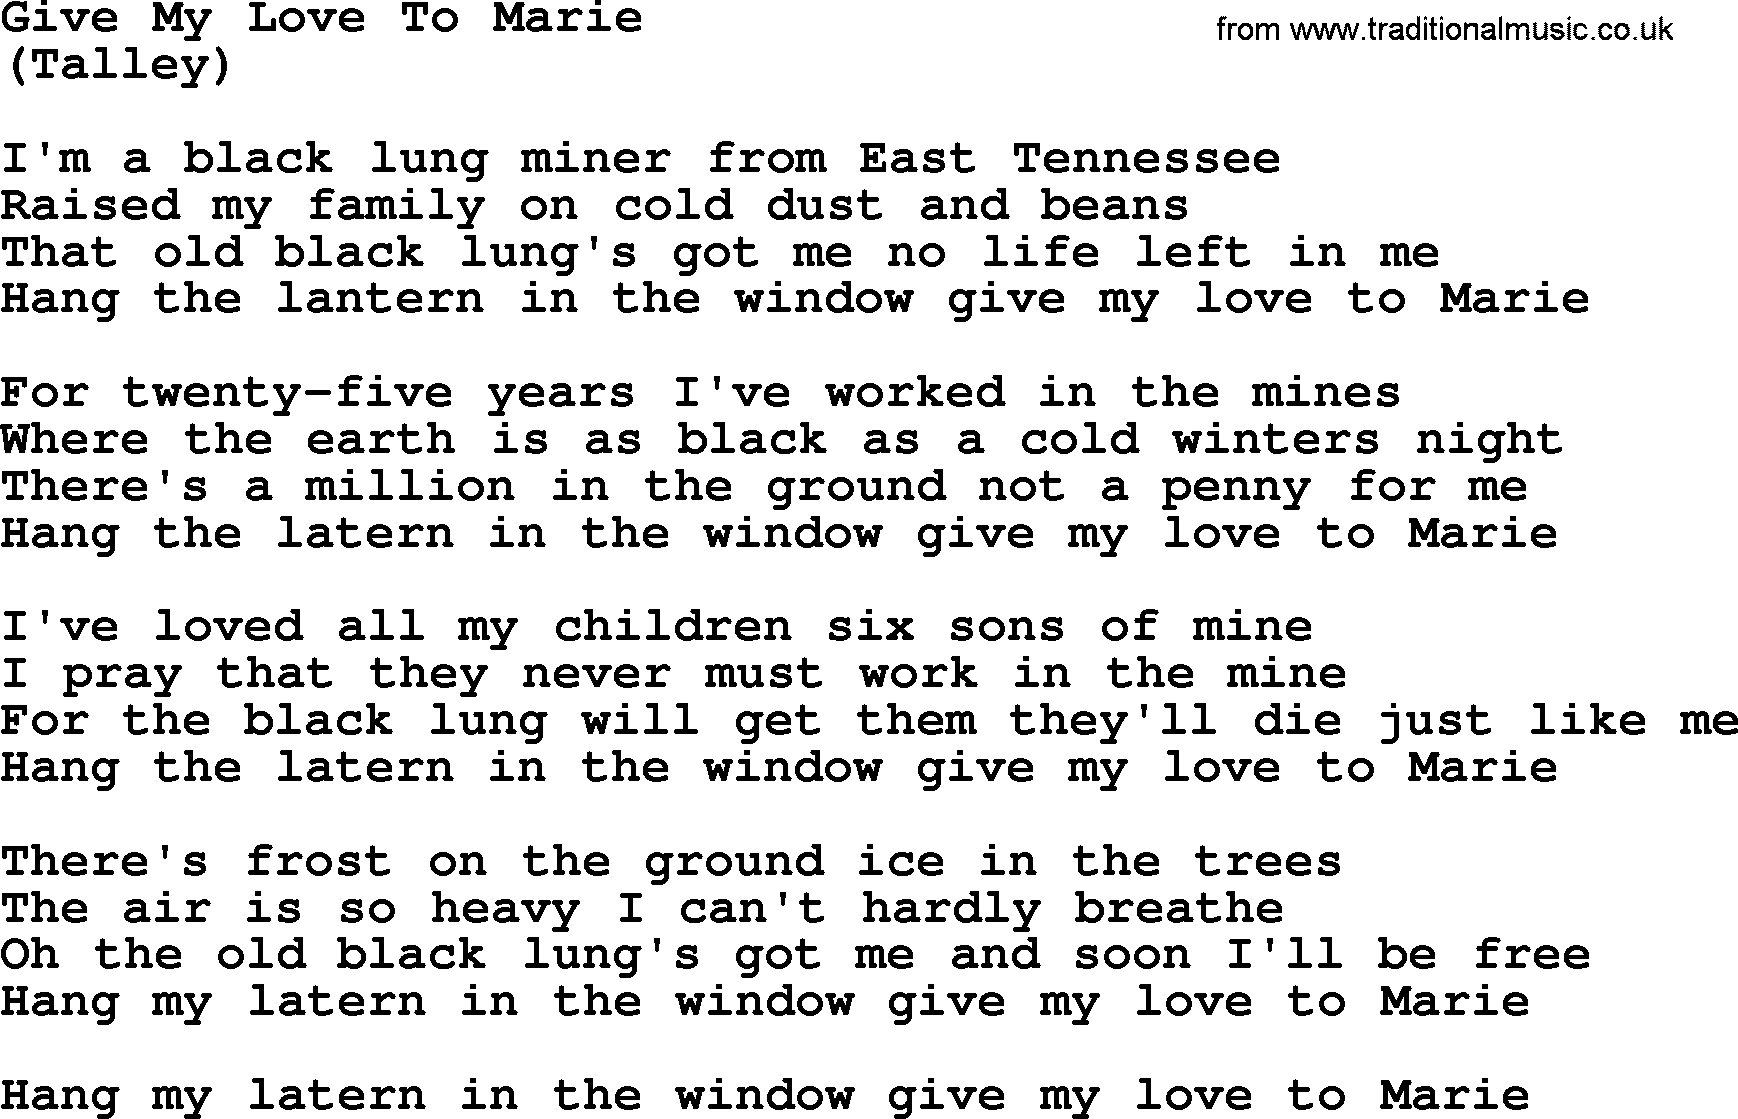 The Byrds song Give My Love To Marie, lyrics